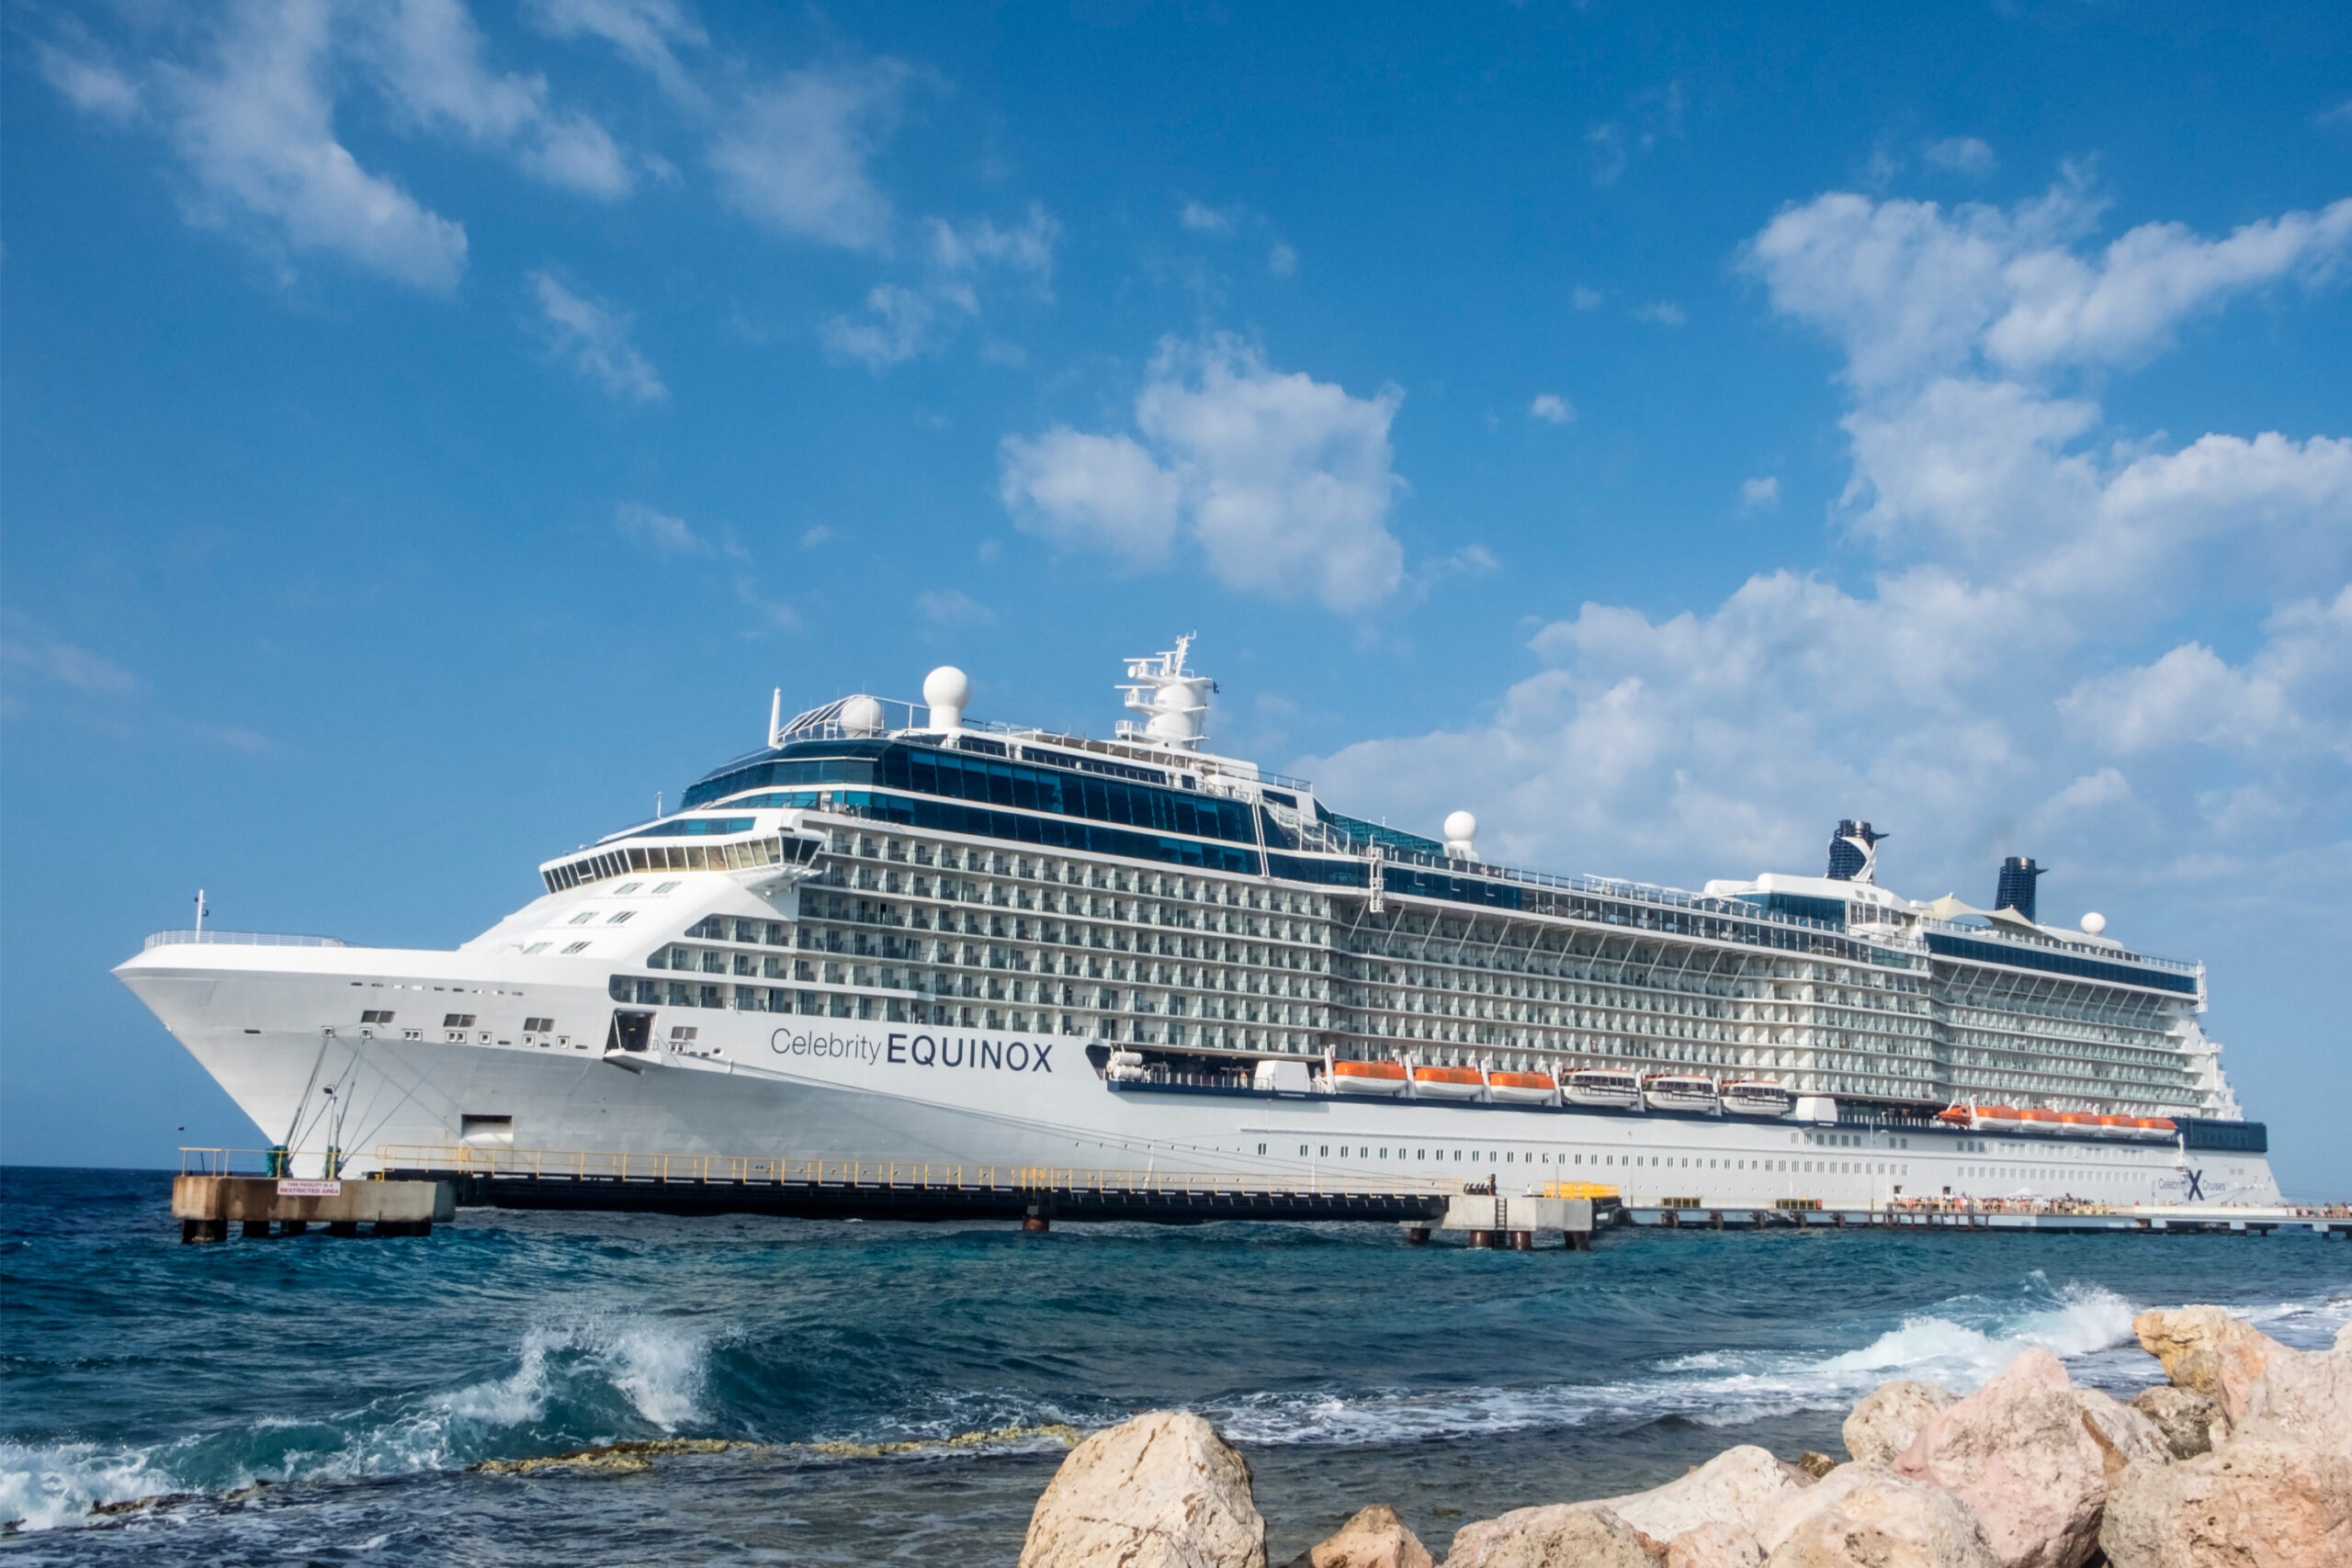 A large cruise ship docked at the rocky shore during a holiday.